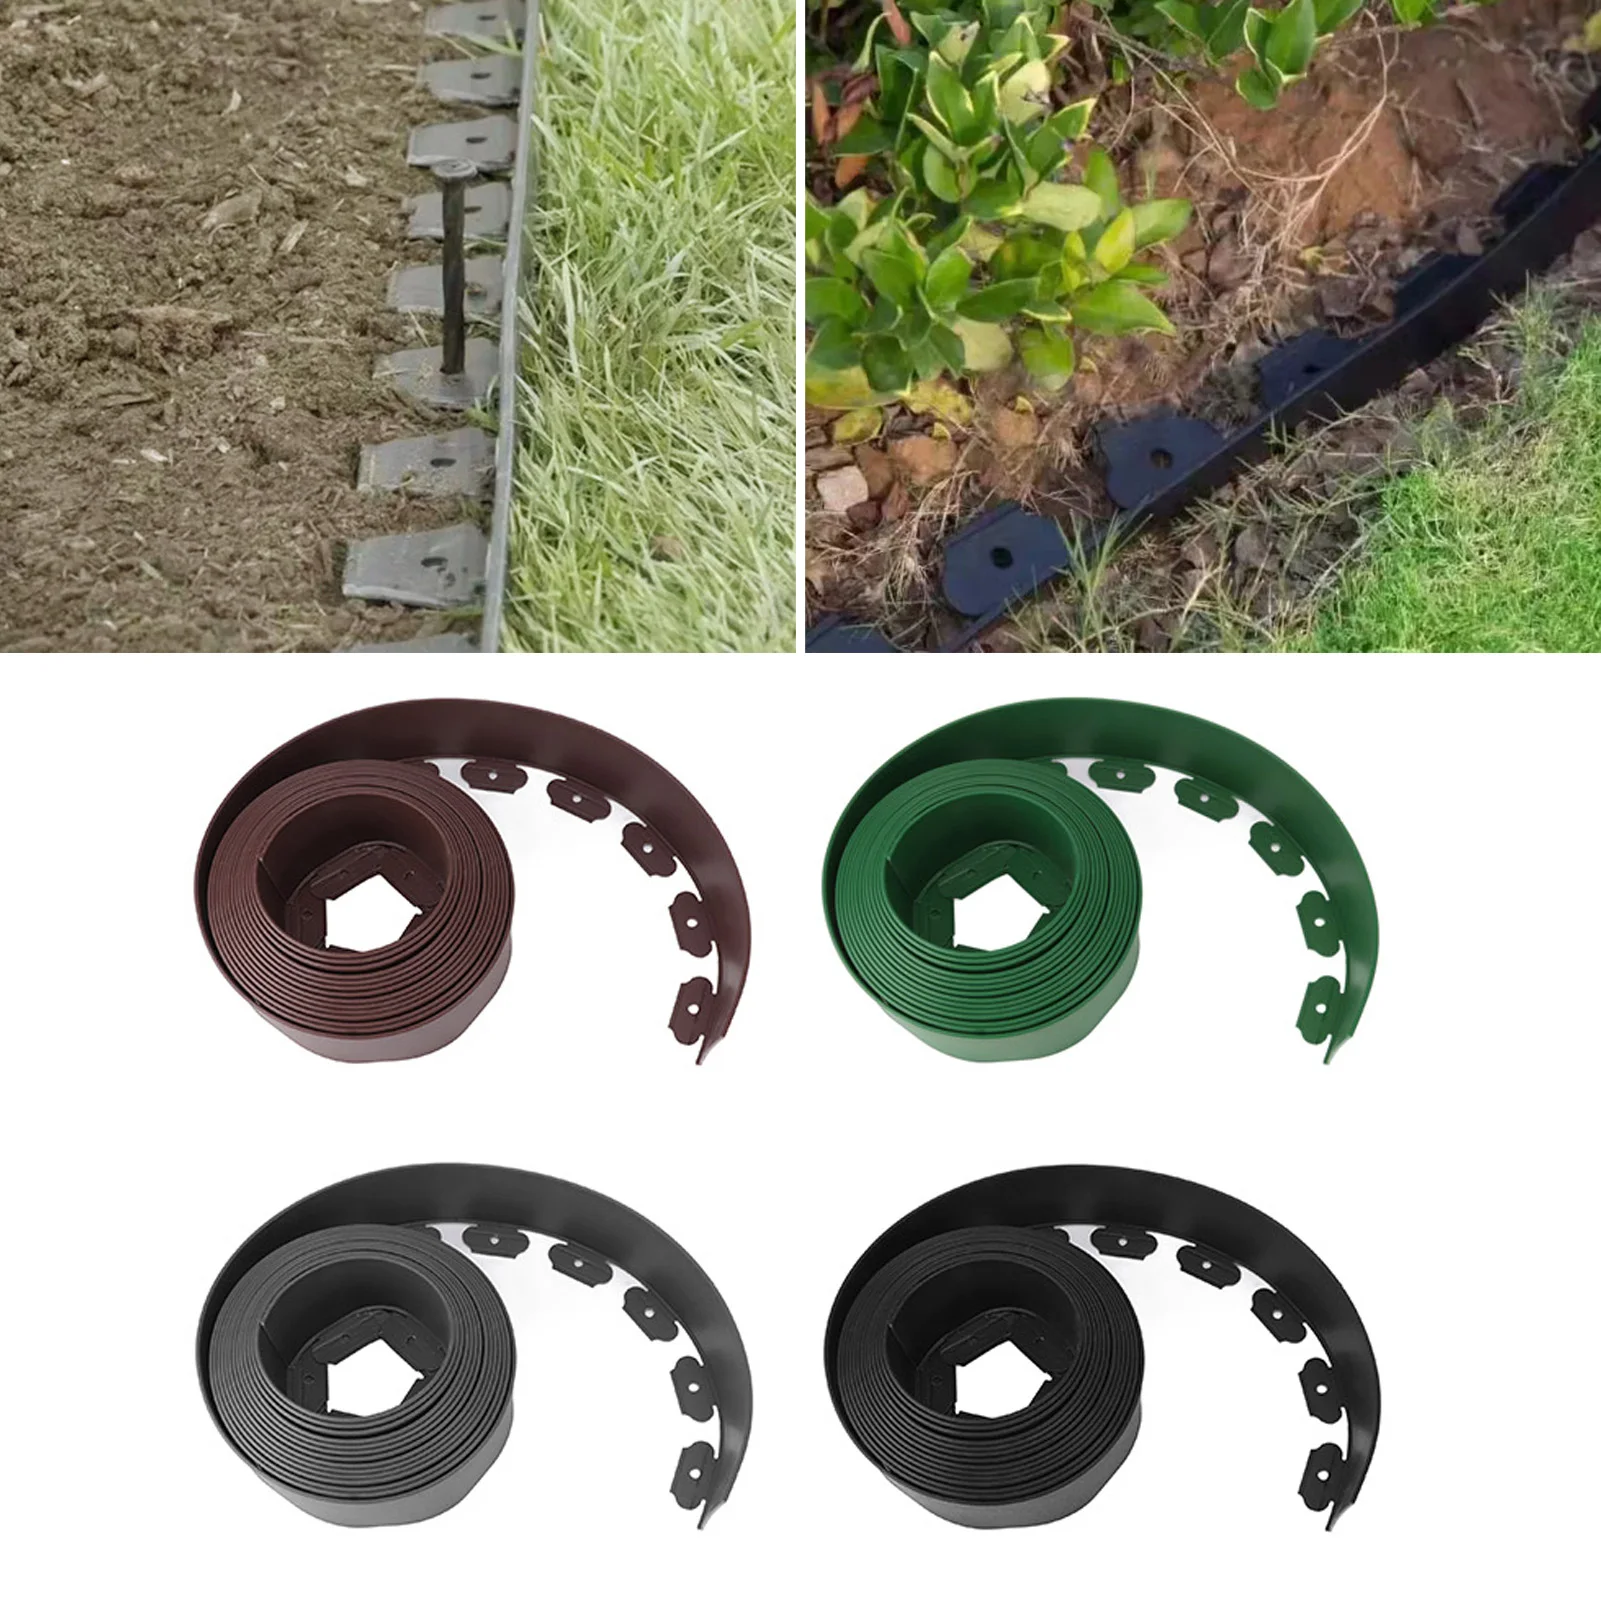 

Garden Landscape Lawn Edging Kit PE No Dig Tall Wall Garden Border with Stakes for Lawn Flower Bed Grass Yard 10cm*5cm*10m